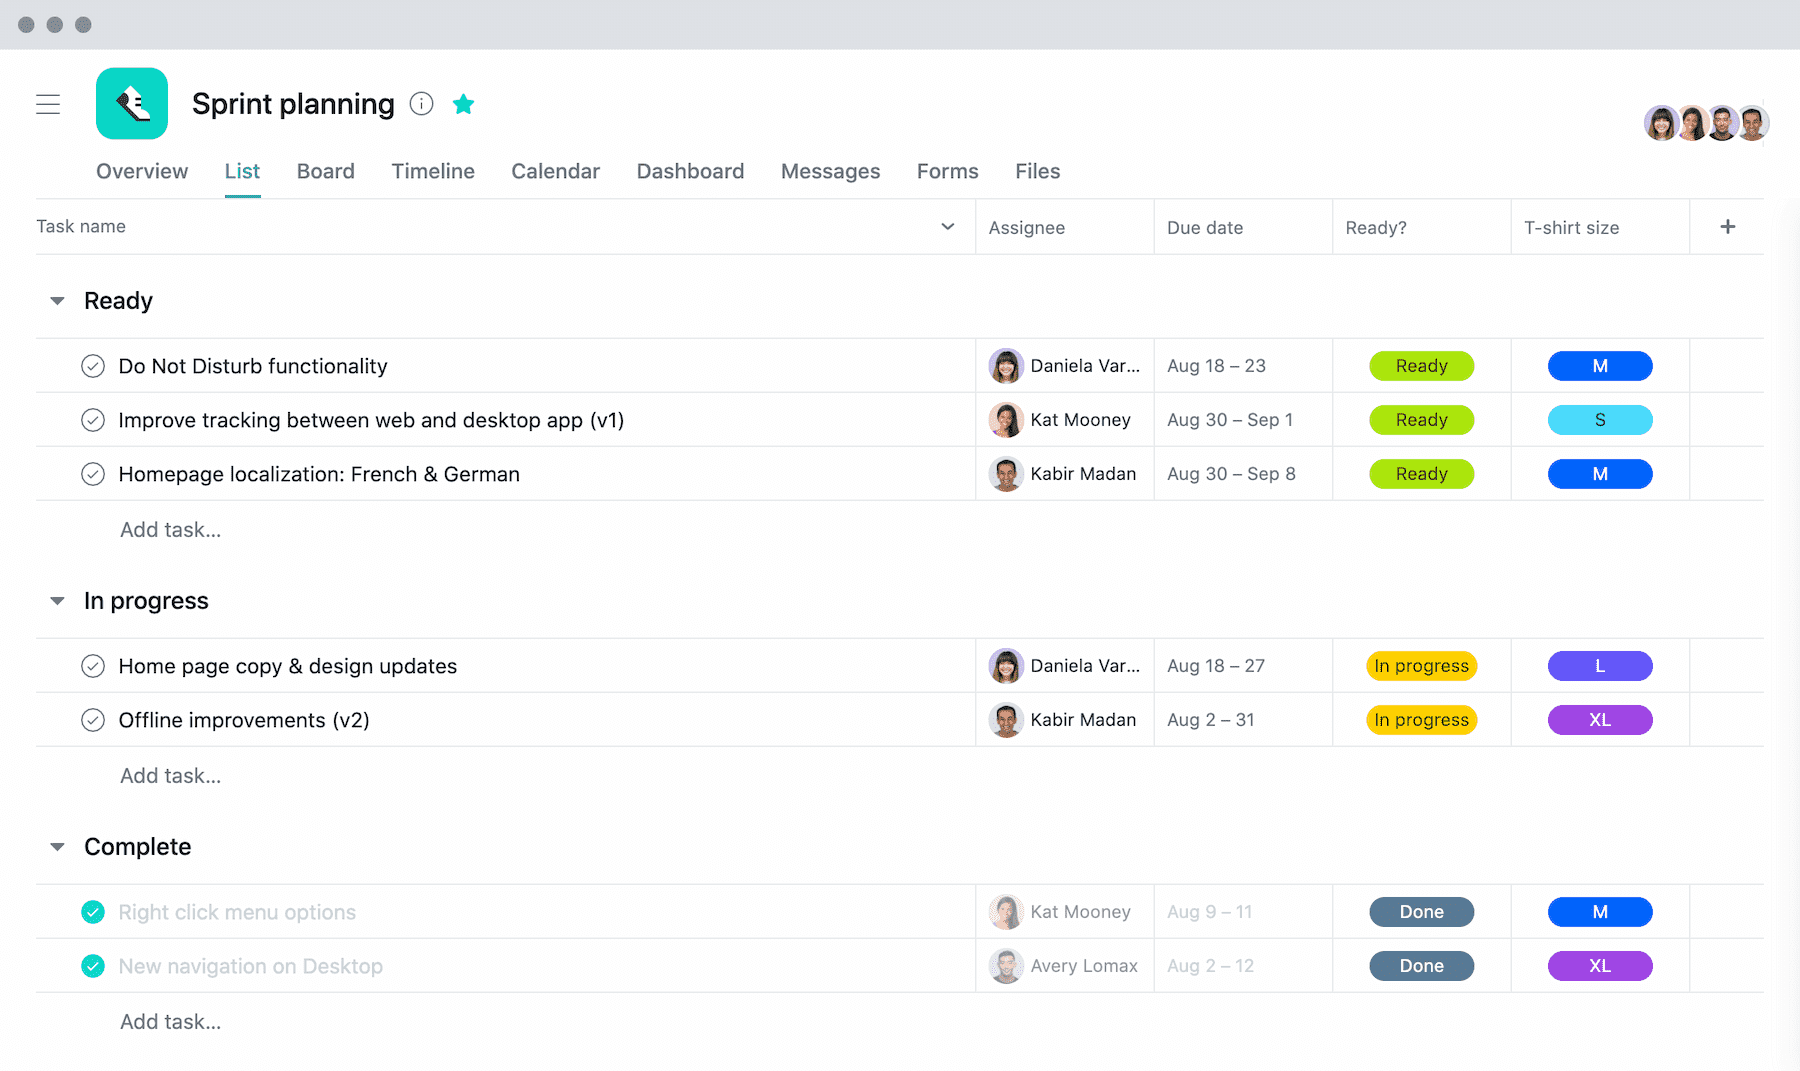 [List view] Sprint planning project with t-shirt sizes in Asana